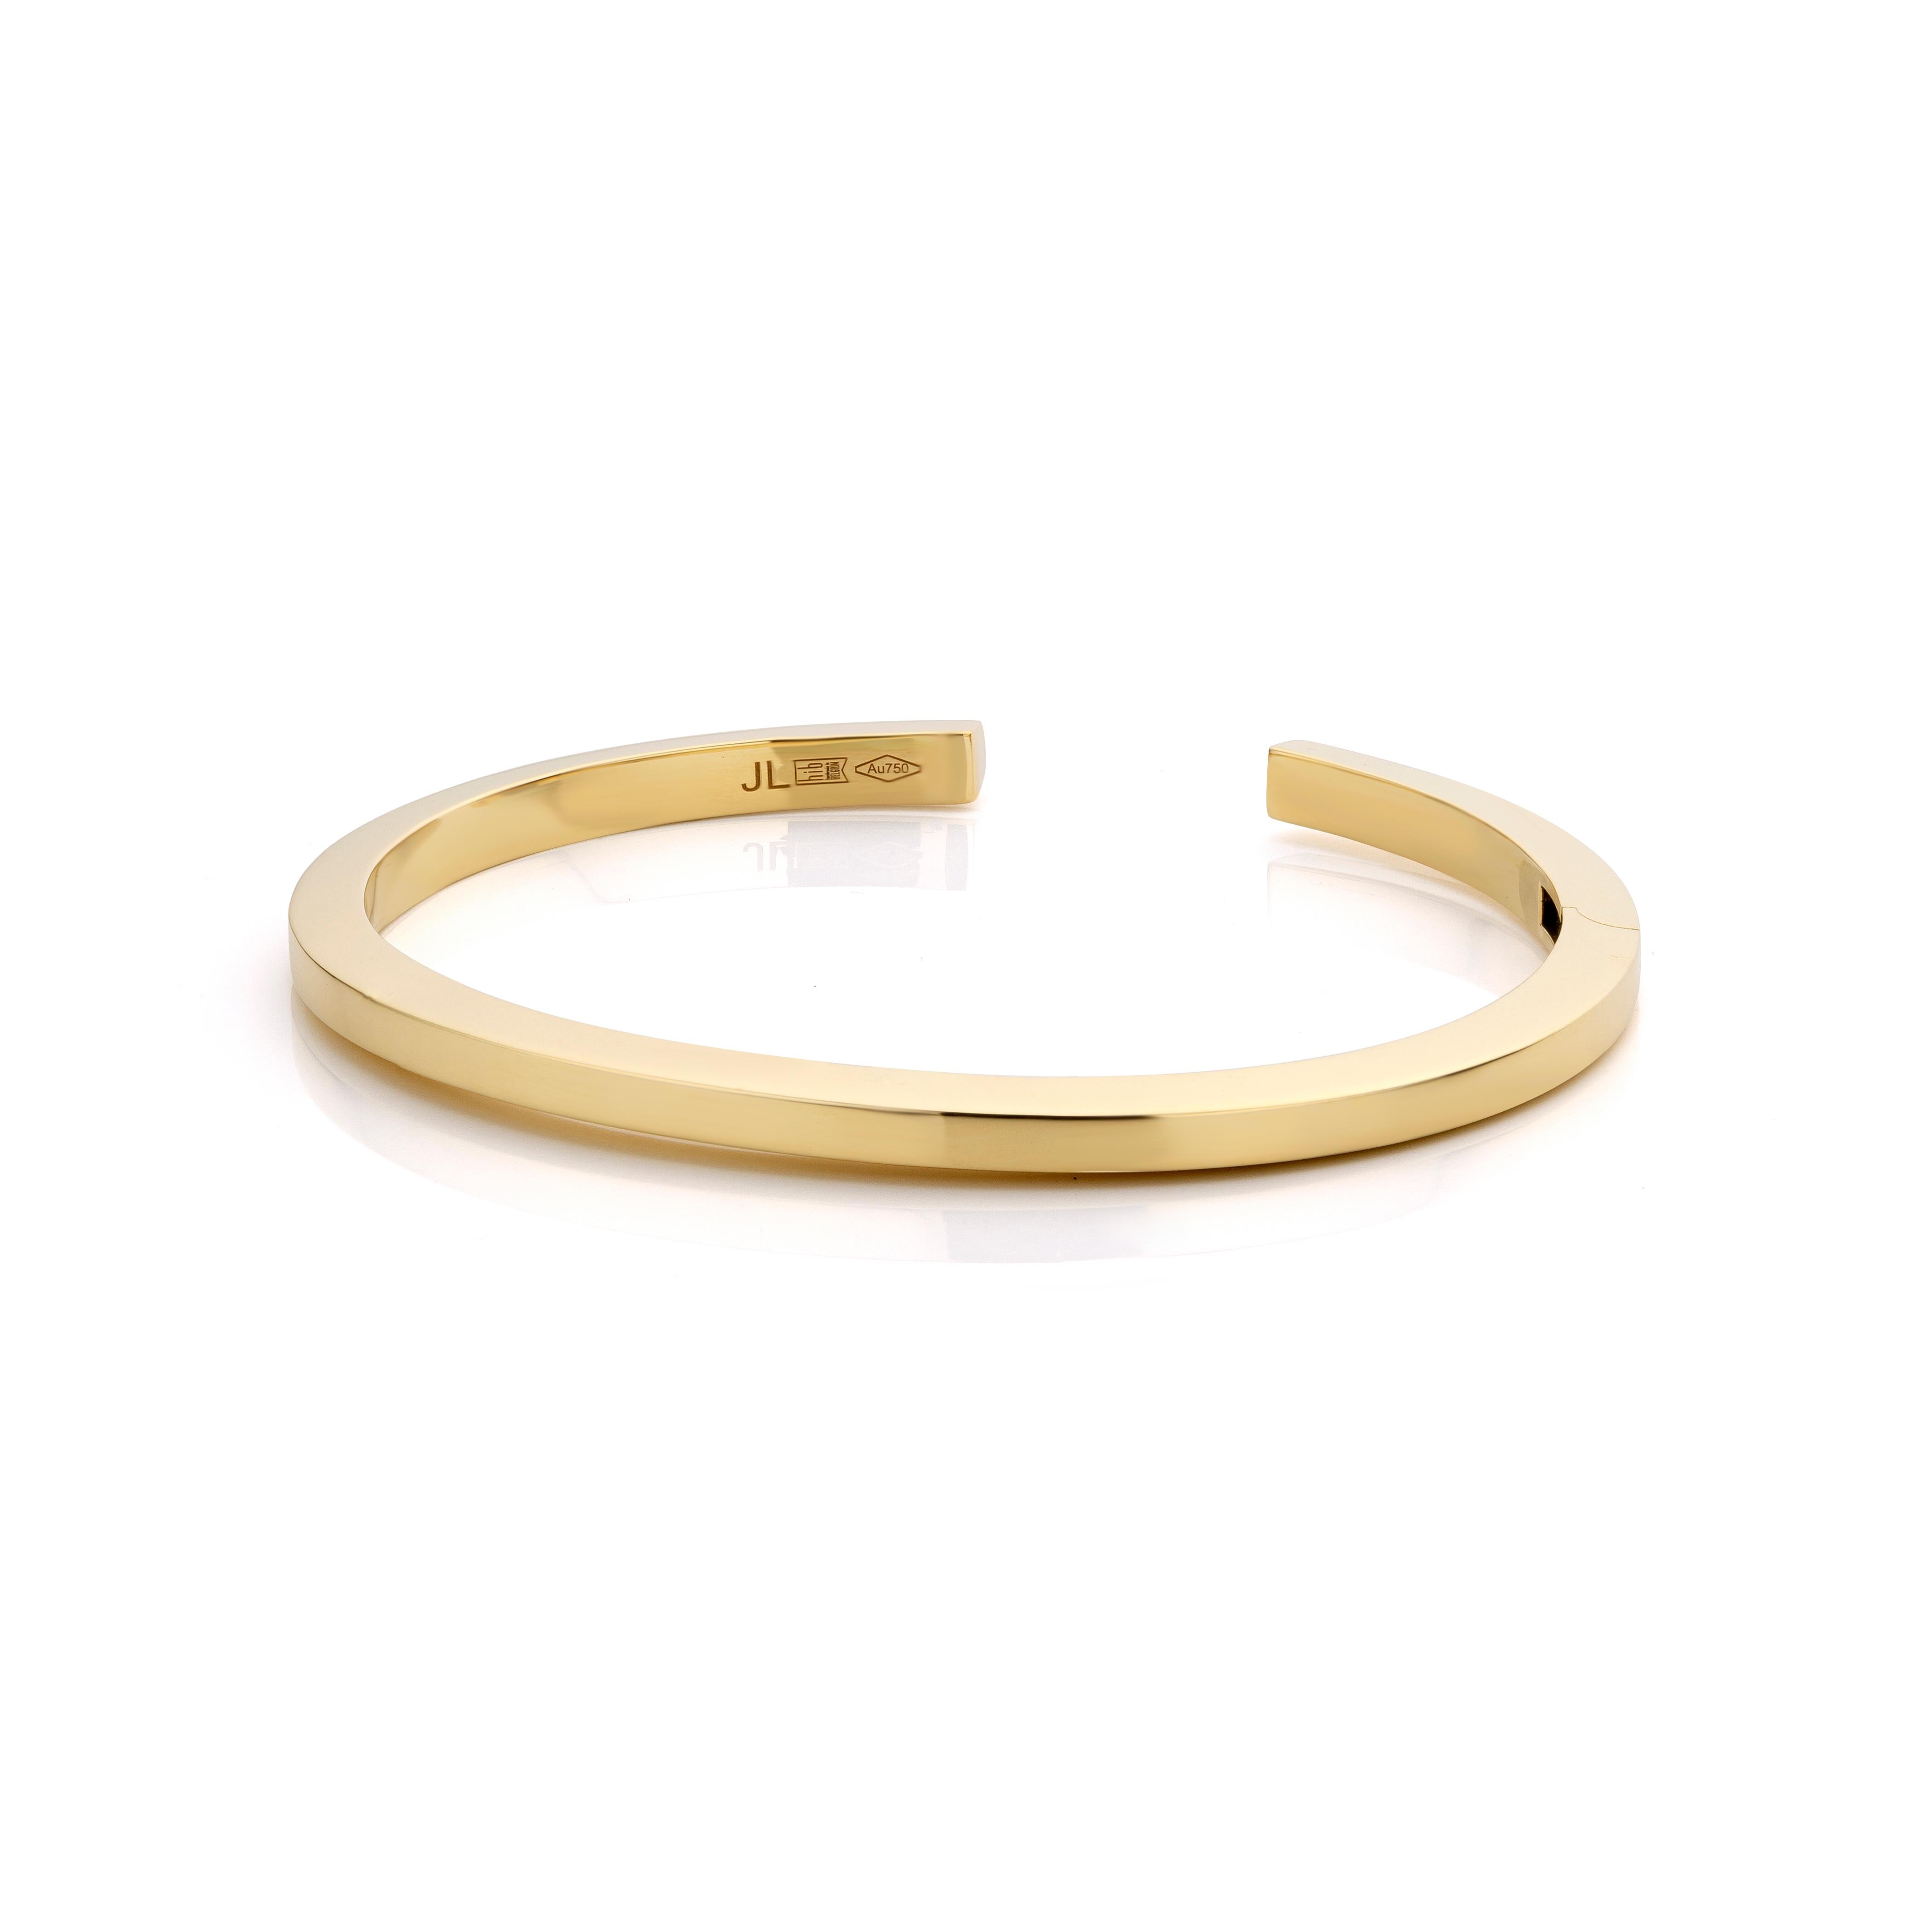 18 Karat Yellow gold Bracelet, completed with a polished surface.

This design is one of Jochen Leen's first designs and is highly recognizable.
This bracelet is well suited to be worn as an every day bracelet and is easy to match with other fine